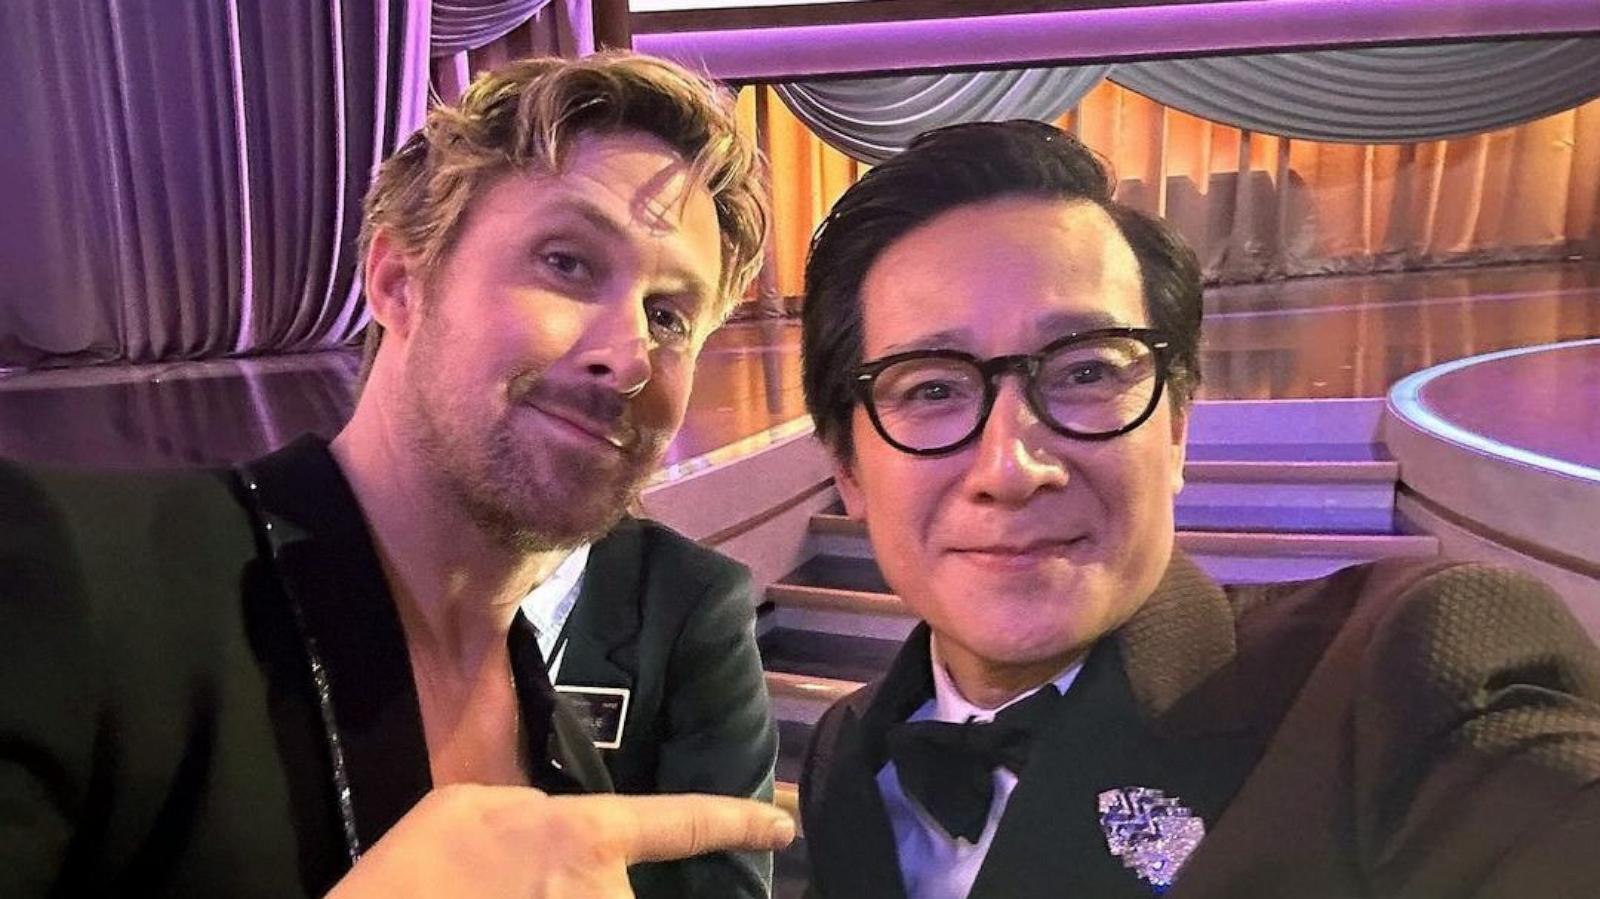 PHOTO: Ryan Gosling and Ke Huy Quan pose backstage at the Academy Awards in this image posted to Instagram.